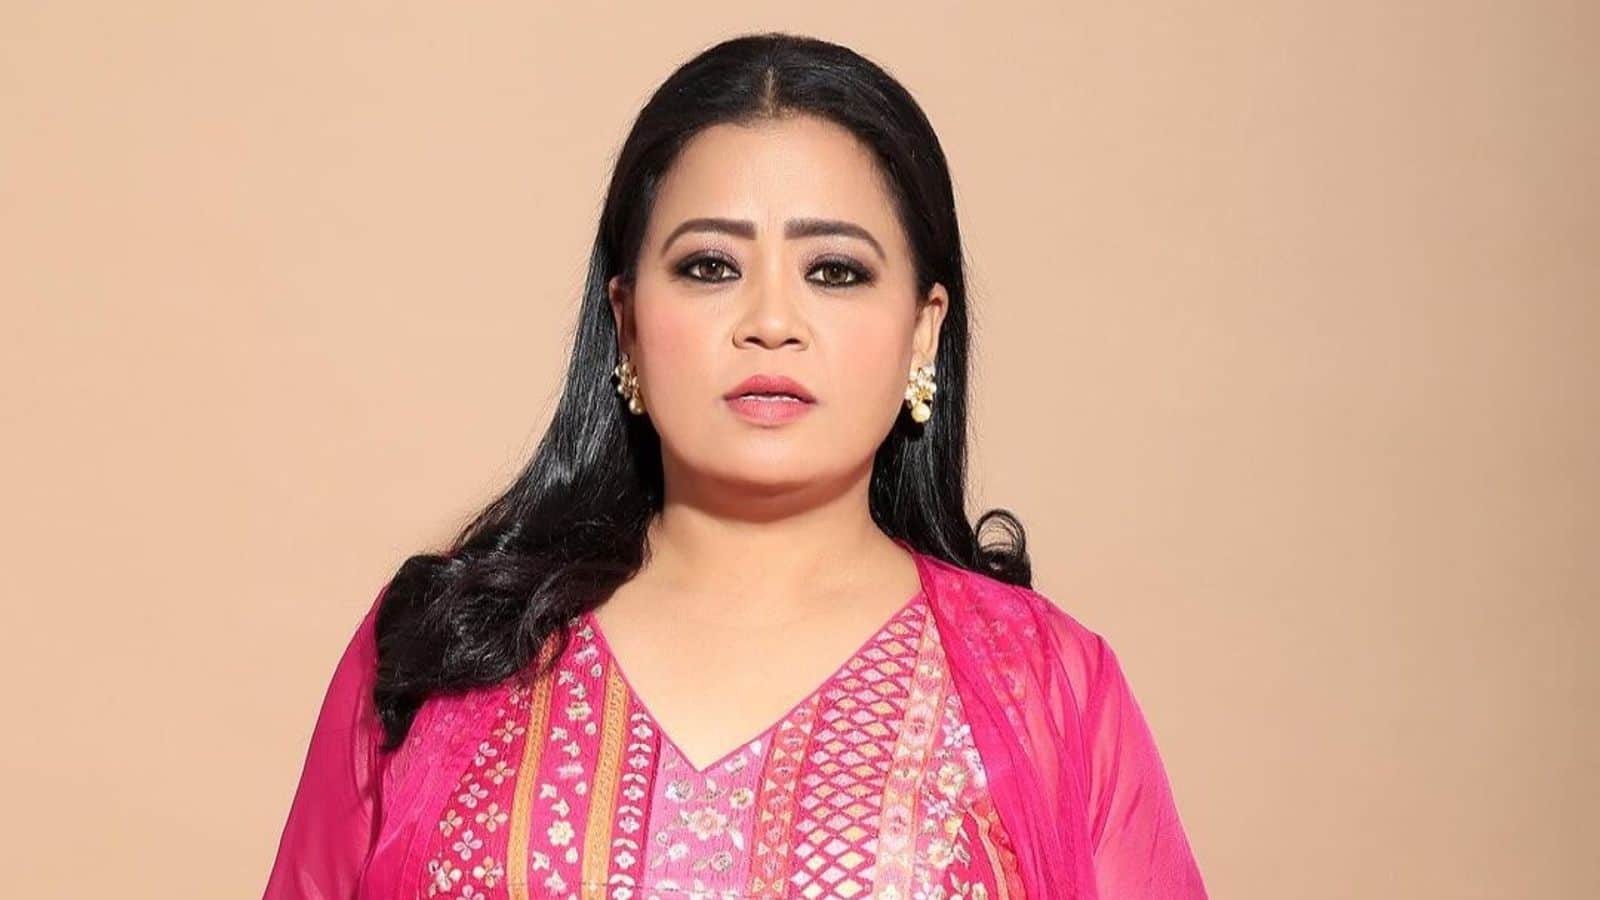 'Very cute': Bharti Singh responds to body-shamers and online trolls